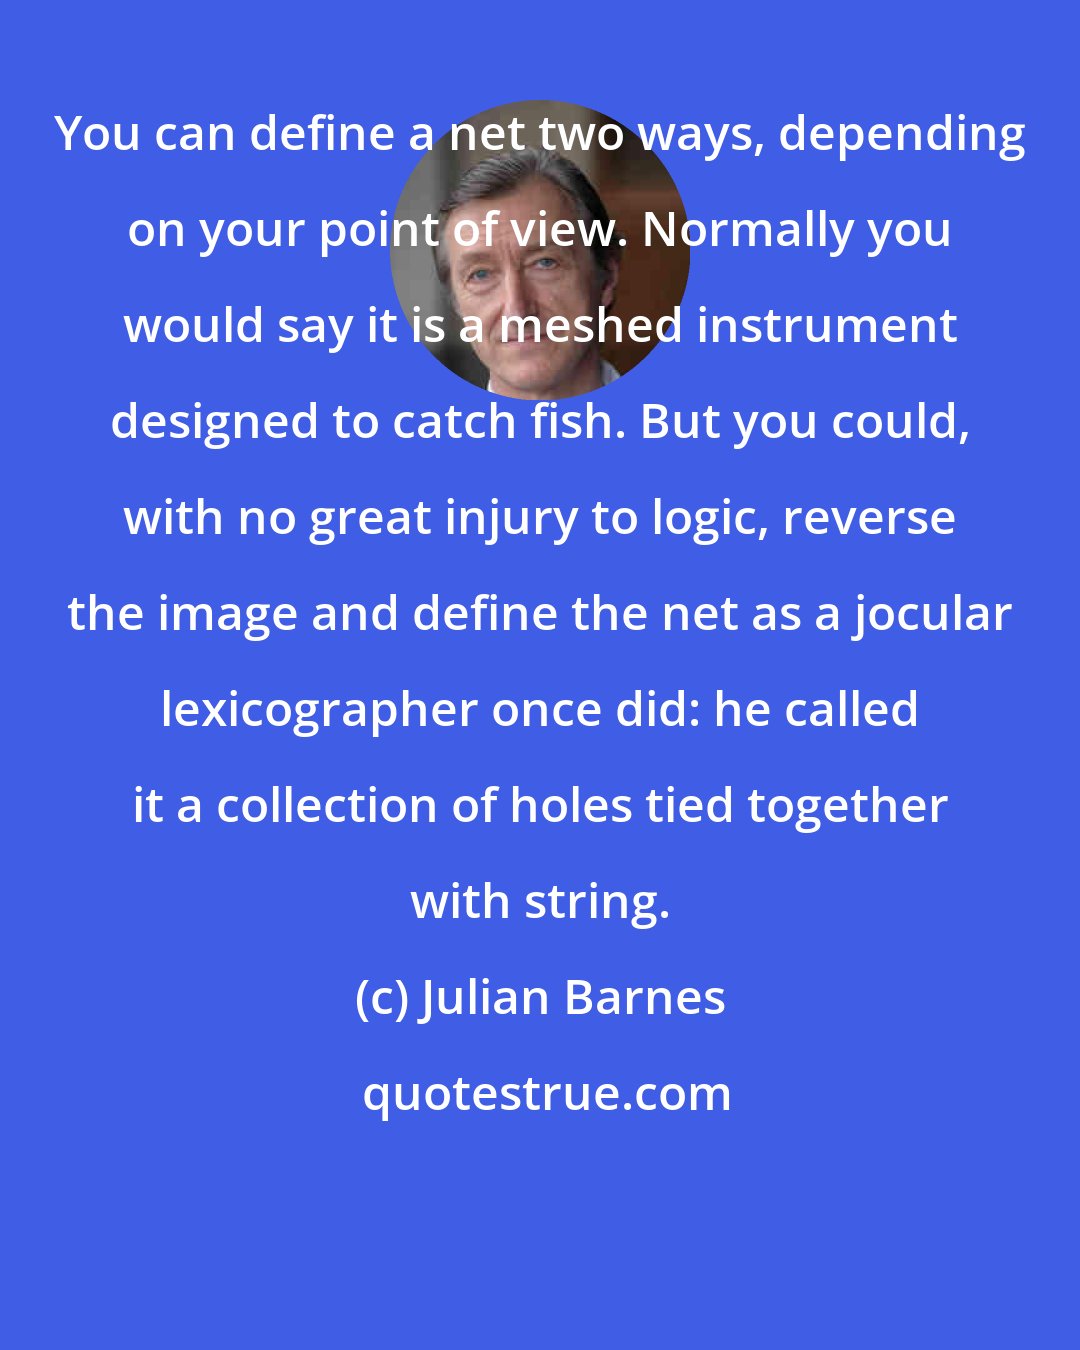 Julian Barnes: You can define a net two ways, depending on your point of view. Normally you would say it is a meshed instrument designed to catch fish. But you could, with no great injury to logic, reverse the image and define the net as a jocular lexicographer once did: he called it a collection of holes tied together with string.